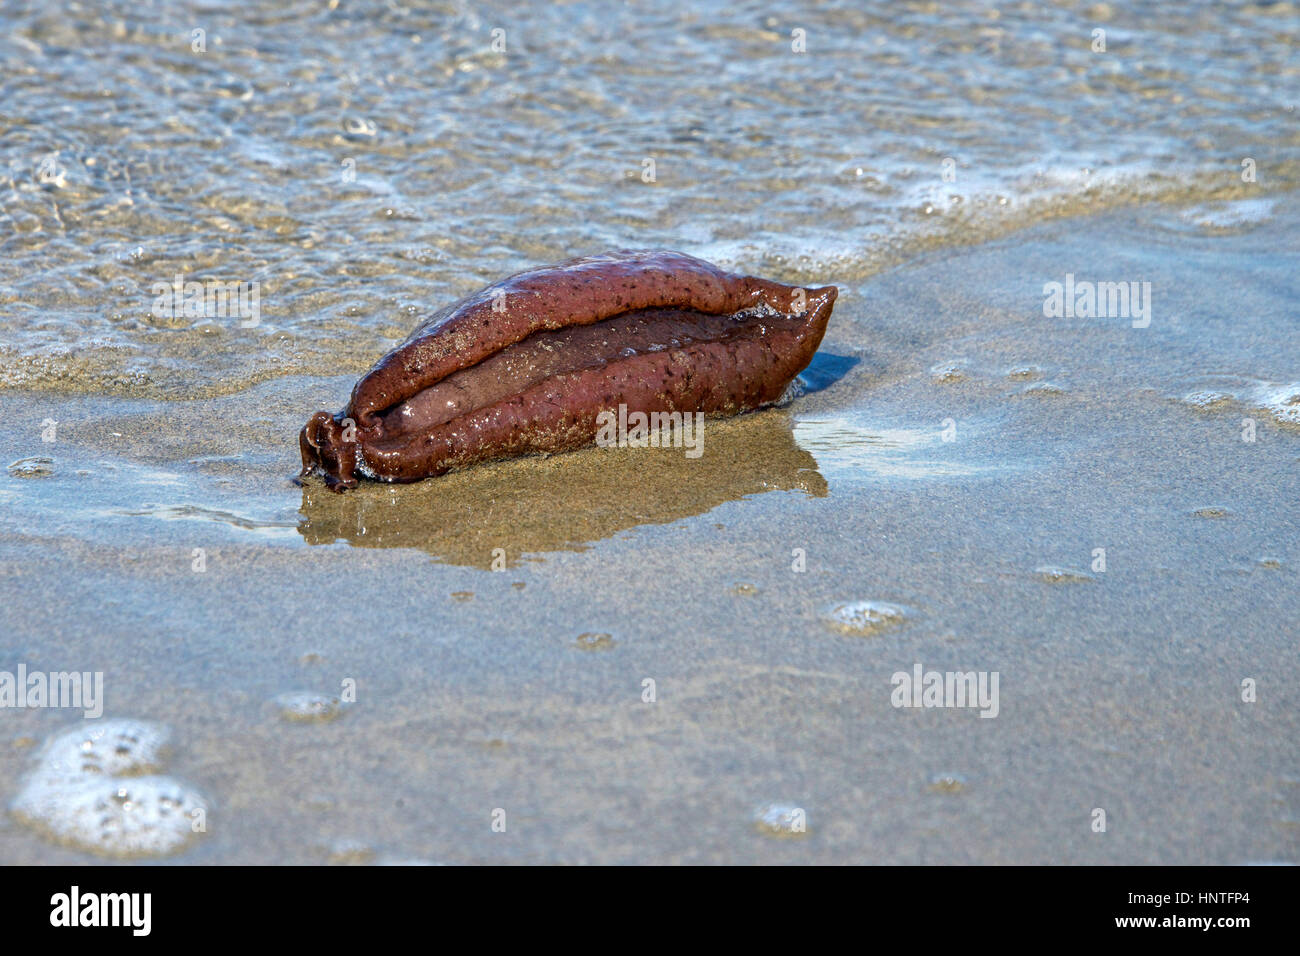 The life cycle of a sea hare is about one year. After they lay eggs, they die. So many washed up on the shores of San Francisco this year, people call Stock Photo